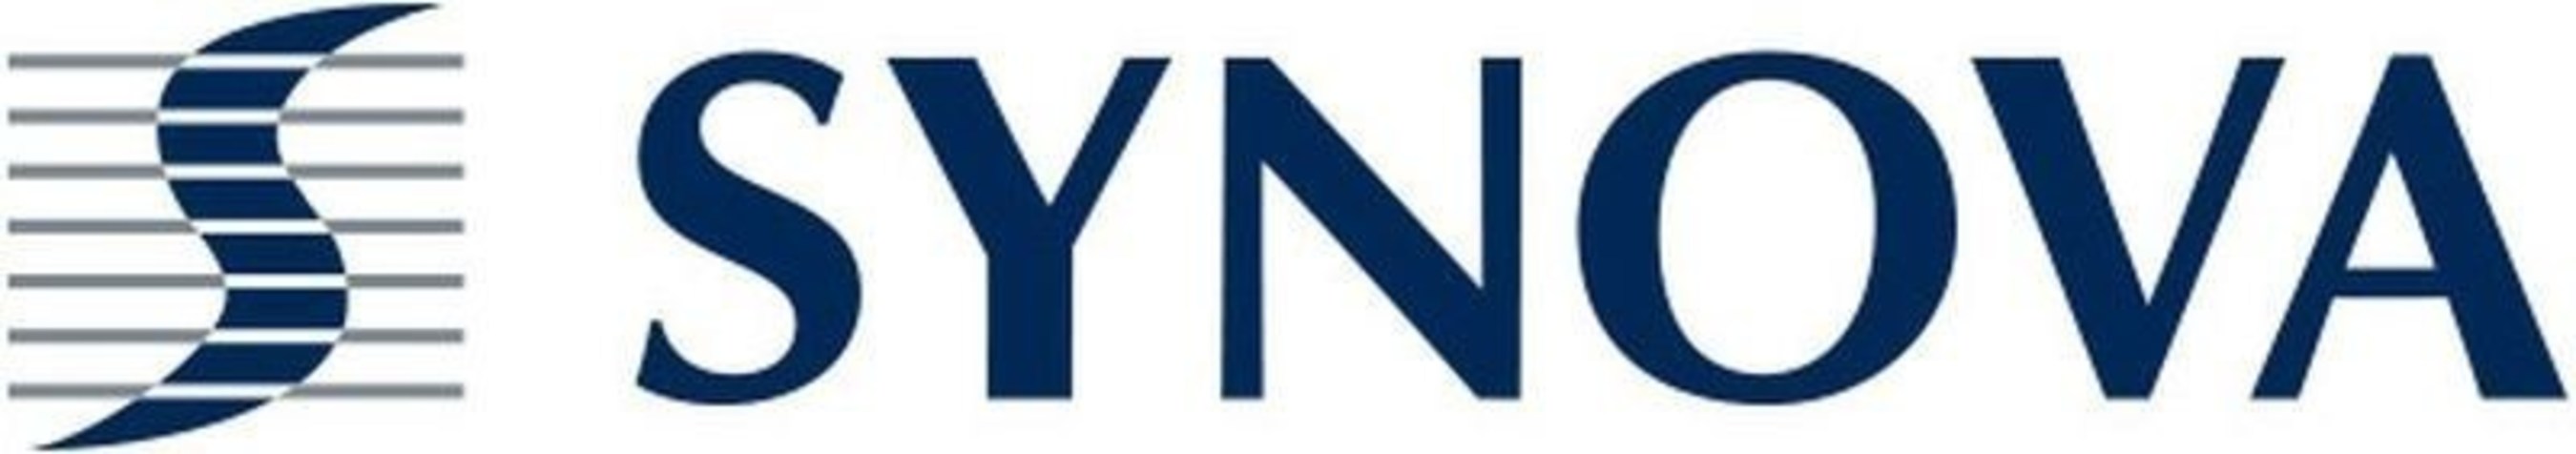 Synova S.A., headquartered in Lausanne, Switzerland, manufactures advanced laser-cutting systems that incorporate the proprietary water jet guided laser technology (Laser MicroJet(R)) in a true industrial CNC platform. Visit our website at www.synova.ch. (PRNewsFoto/Synova S.A.)